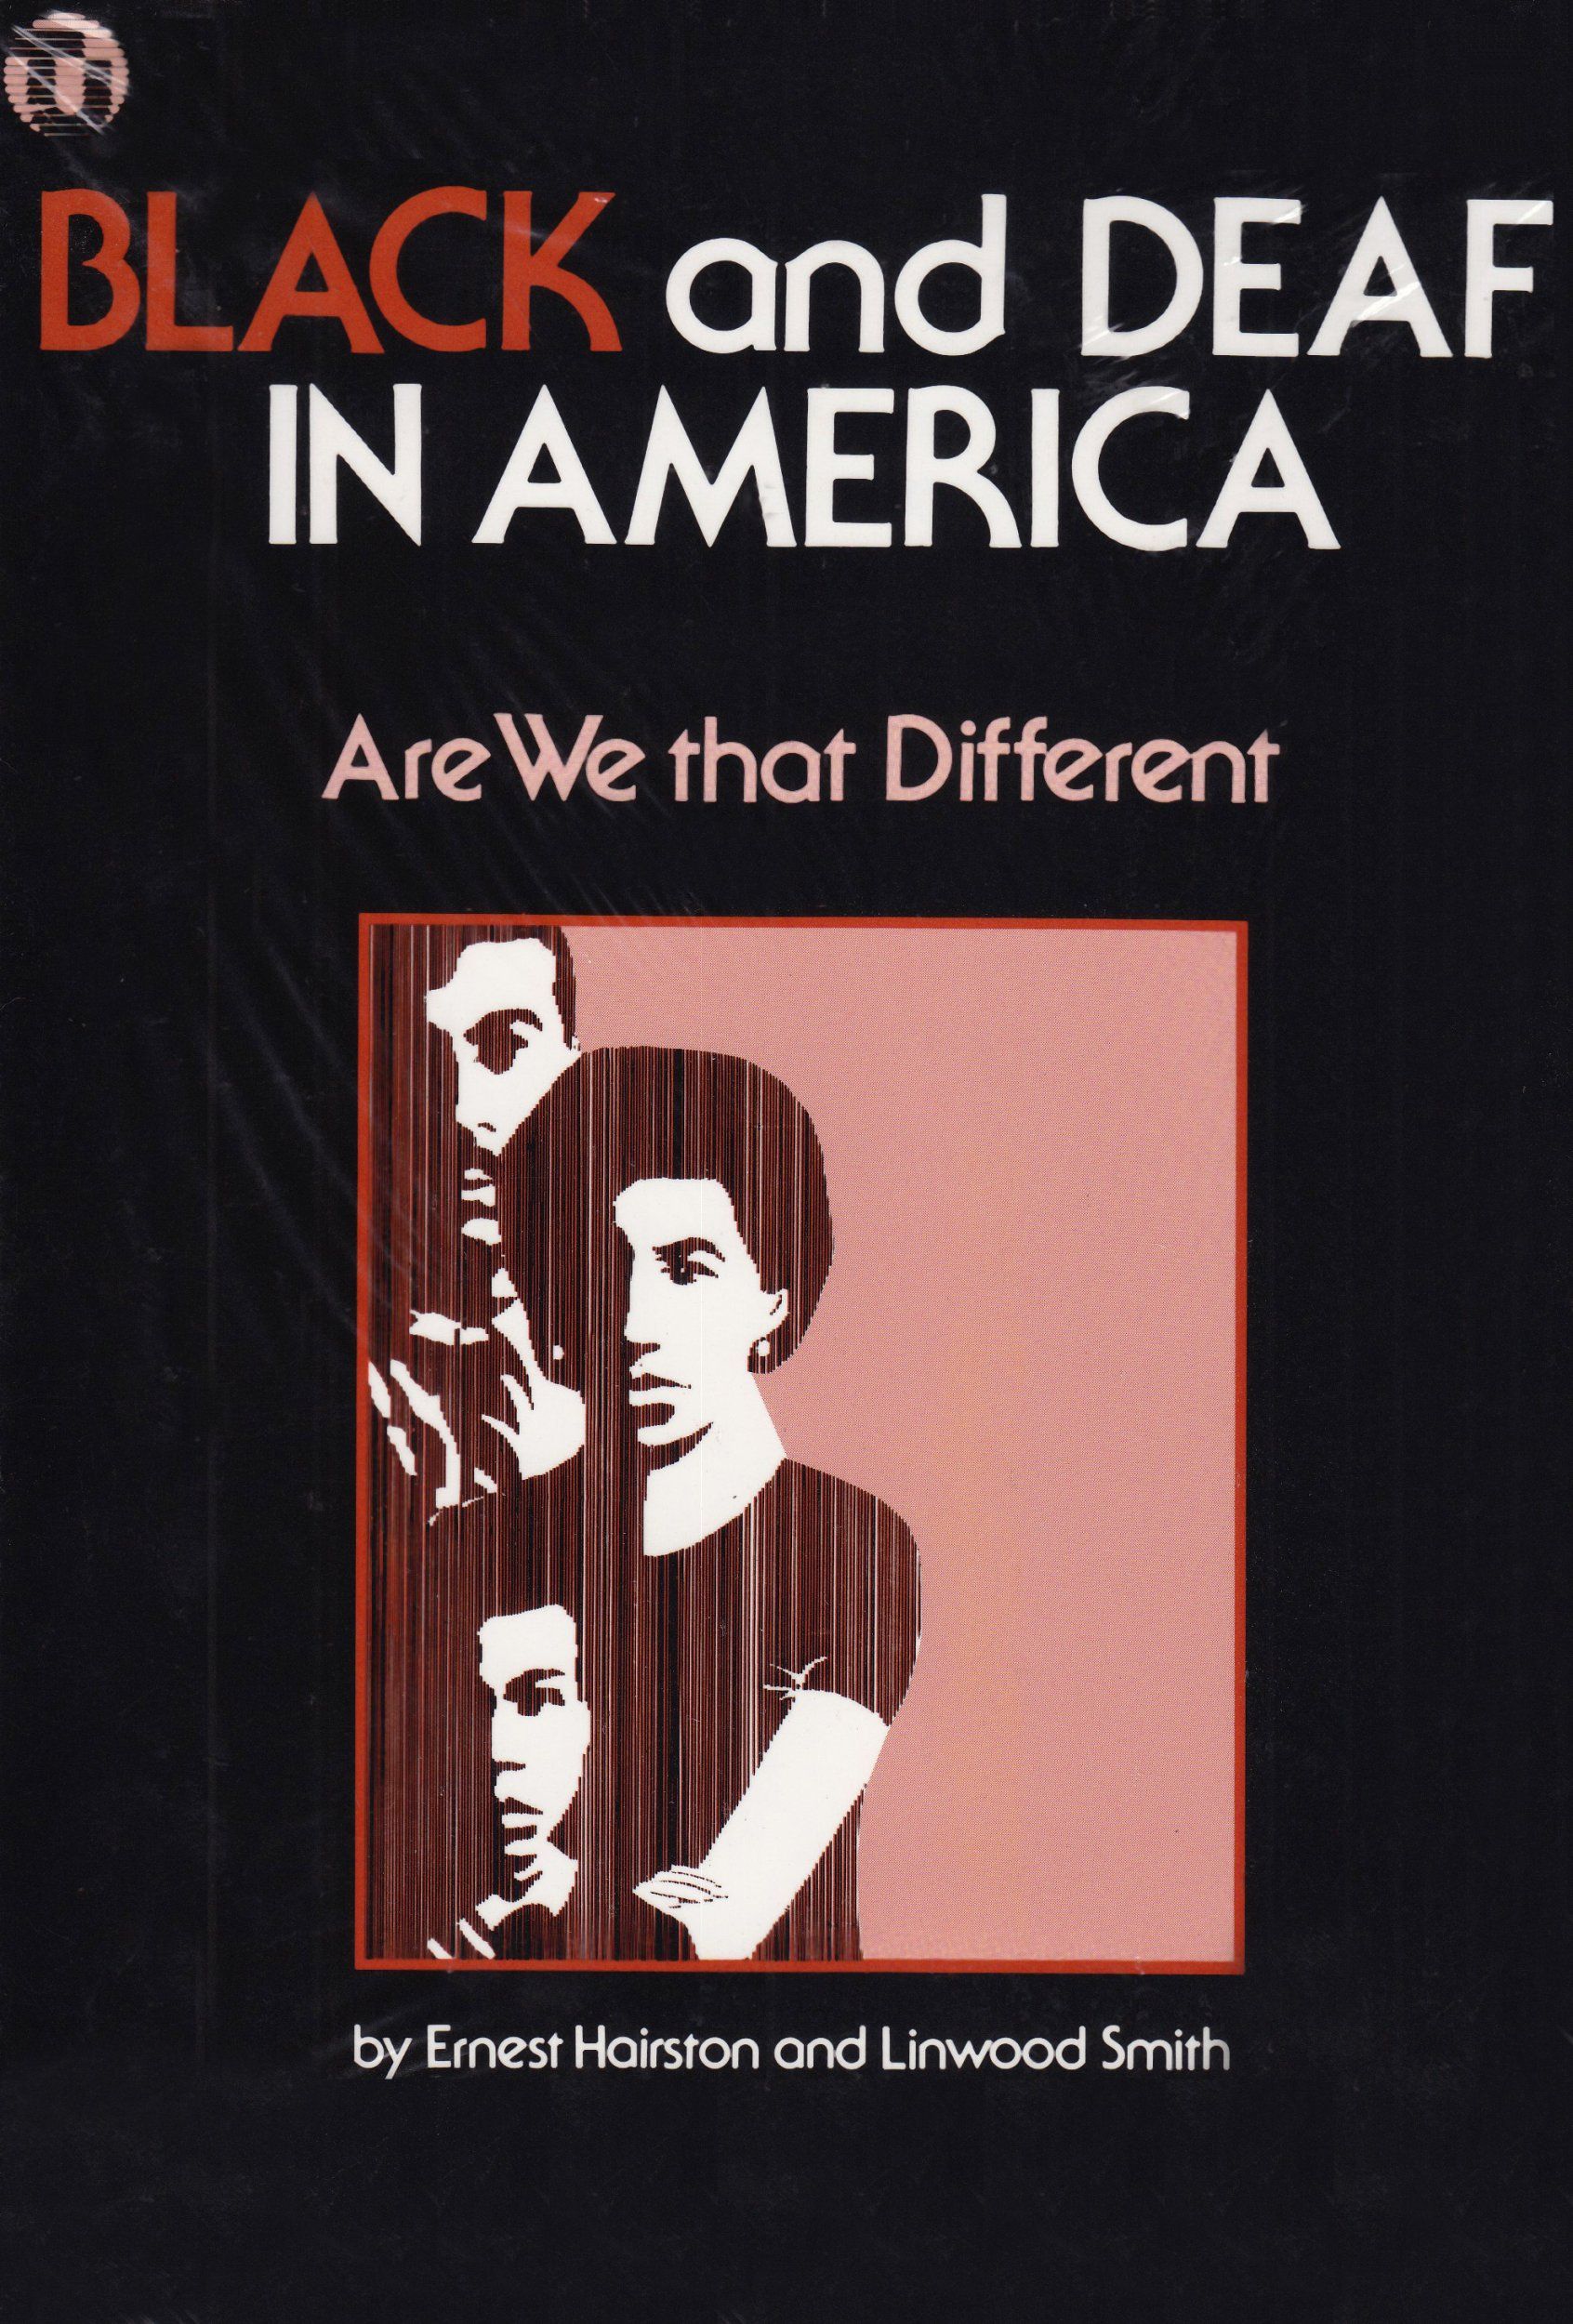 cover of the book Black and deaf in America